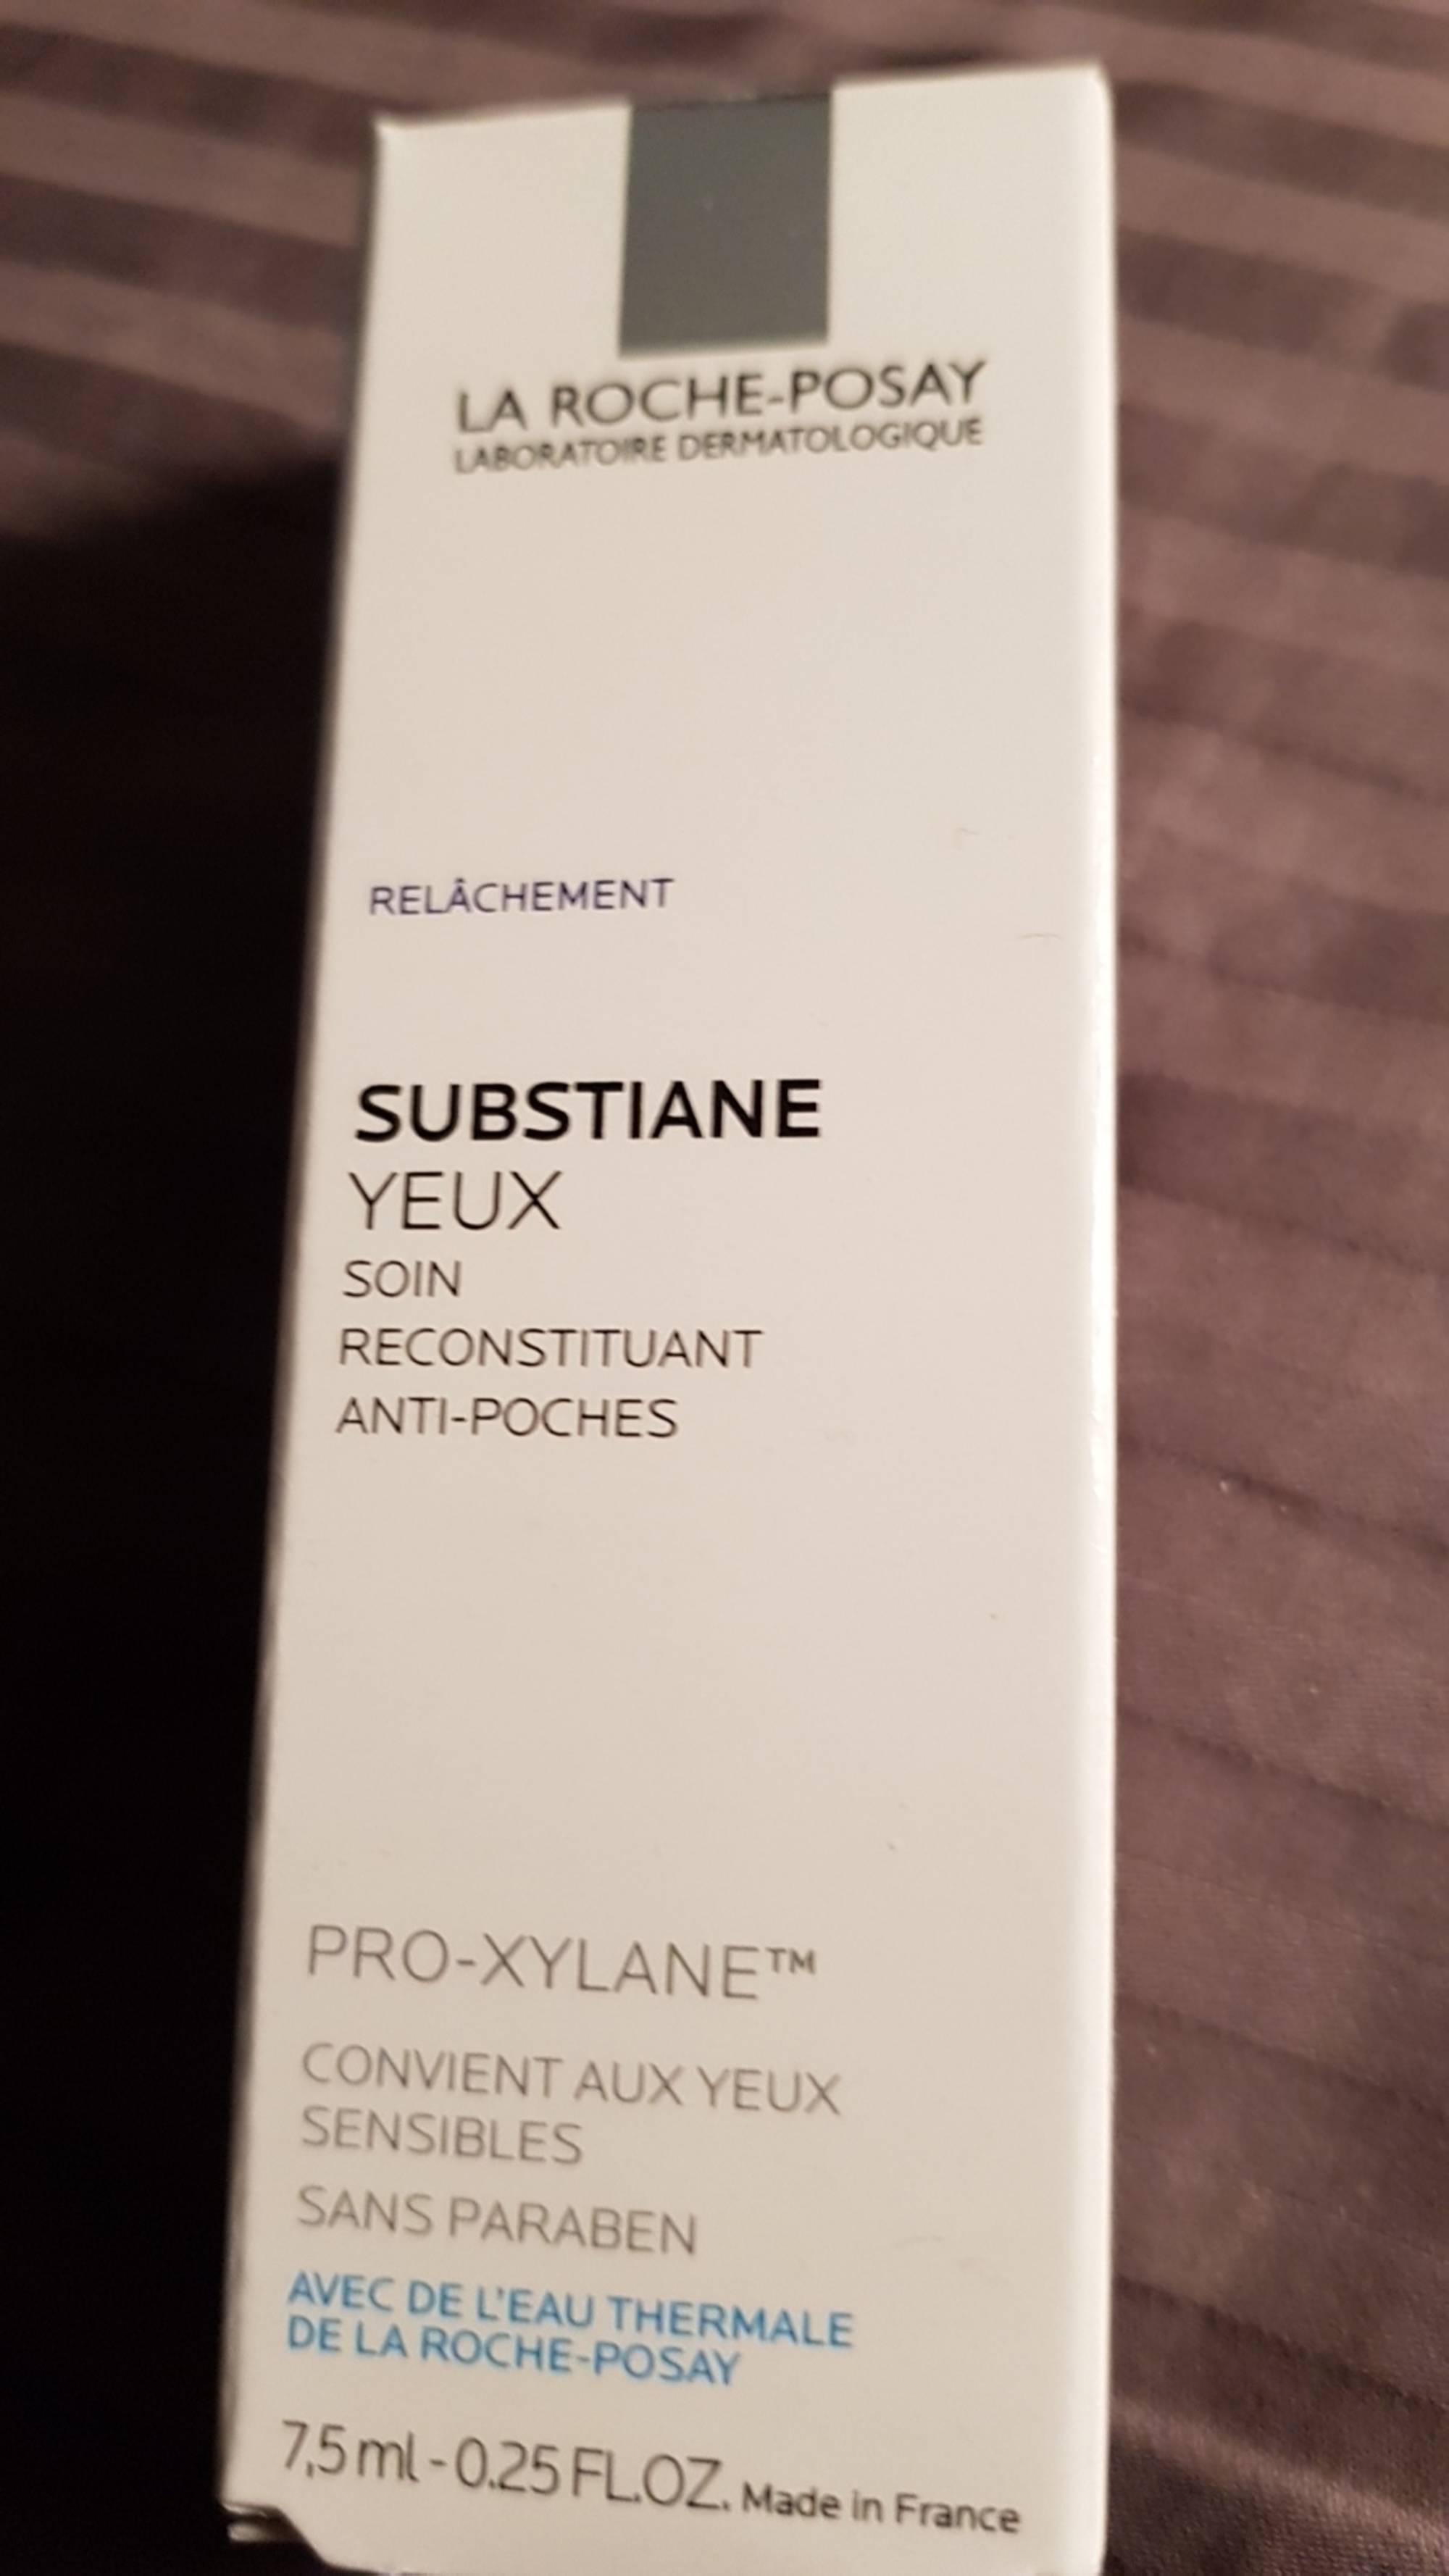 LA ROCHE-POSAY - Substiane  - Yeux soin reconstituant anti-poches